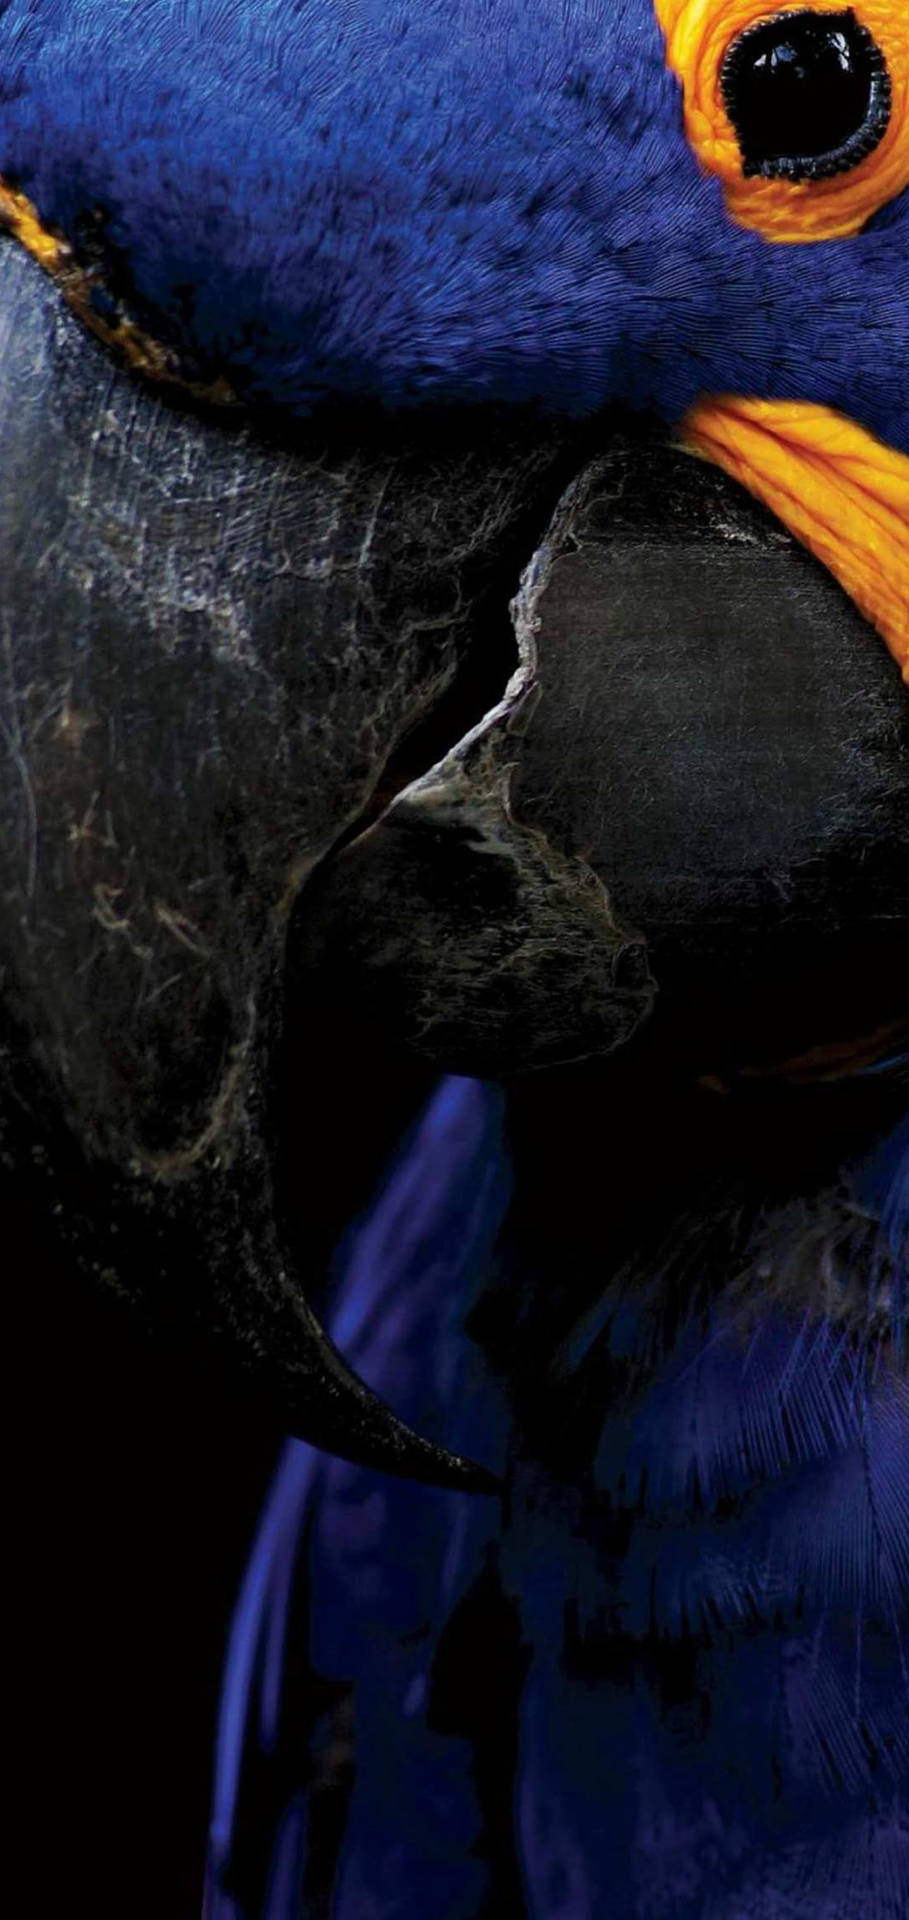 Samsung S10 Display - Captivating Image Of A Hyacinth Macaw Background